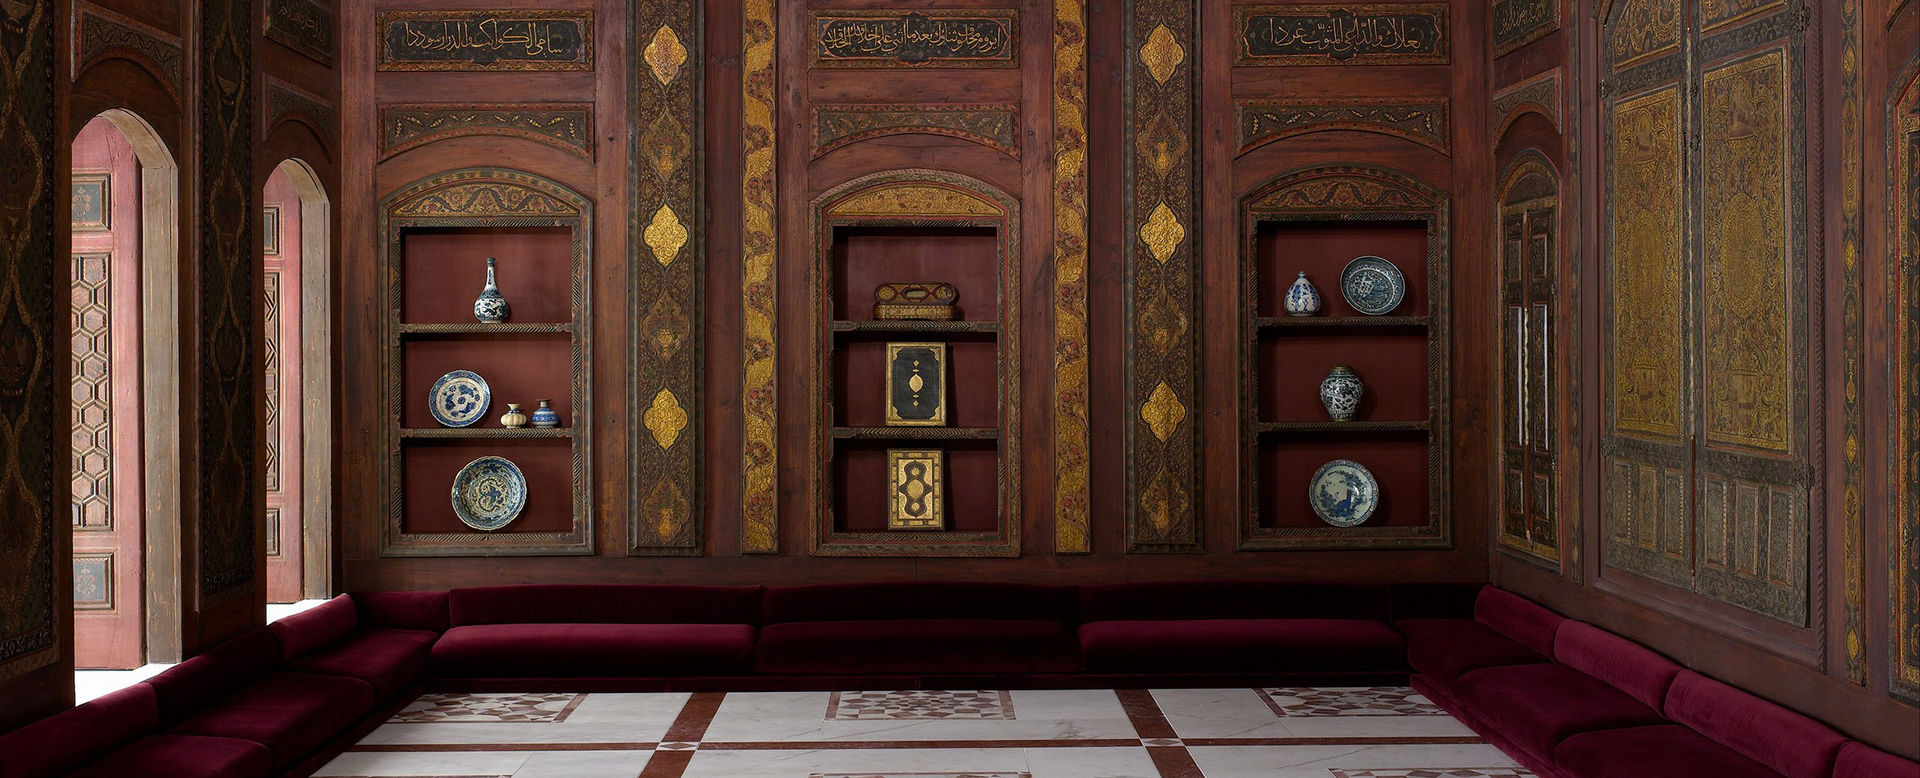 A close-up of a room from Damascus decorated with gilded dark wood paneling, low dark red velvet covered cushions; open windows on the left illuminate the room with light